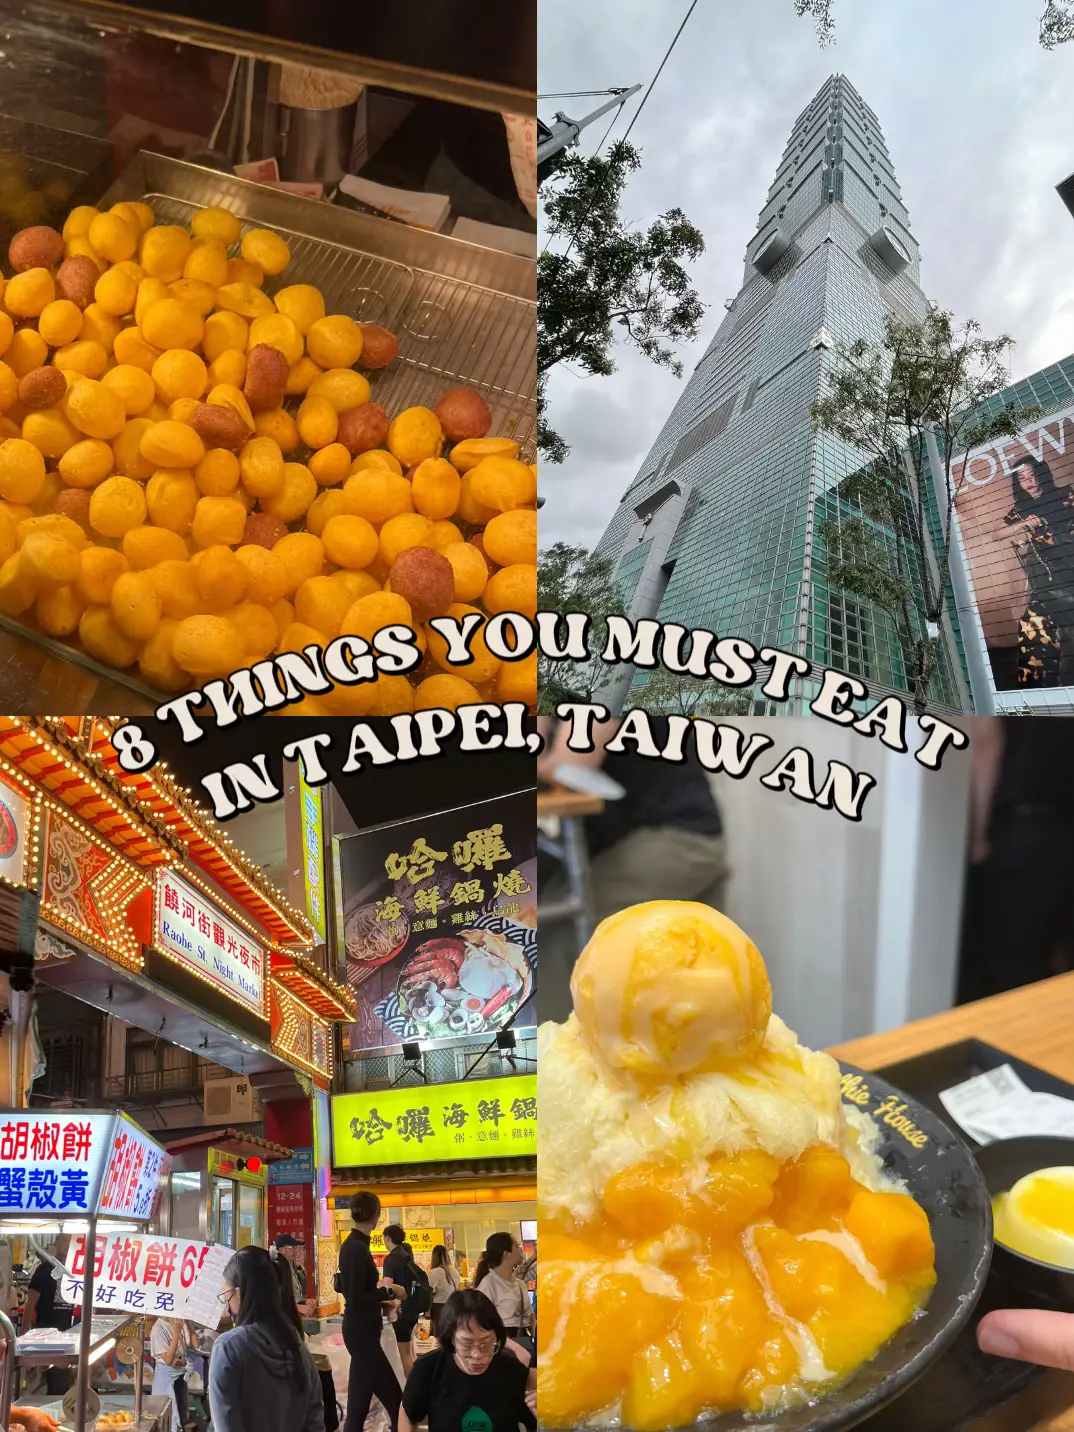 SAVE THIS FOR YOUR NEXT TAIWAN TRIP 🇹🇼's images